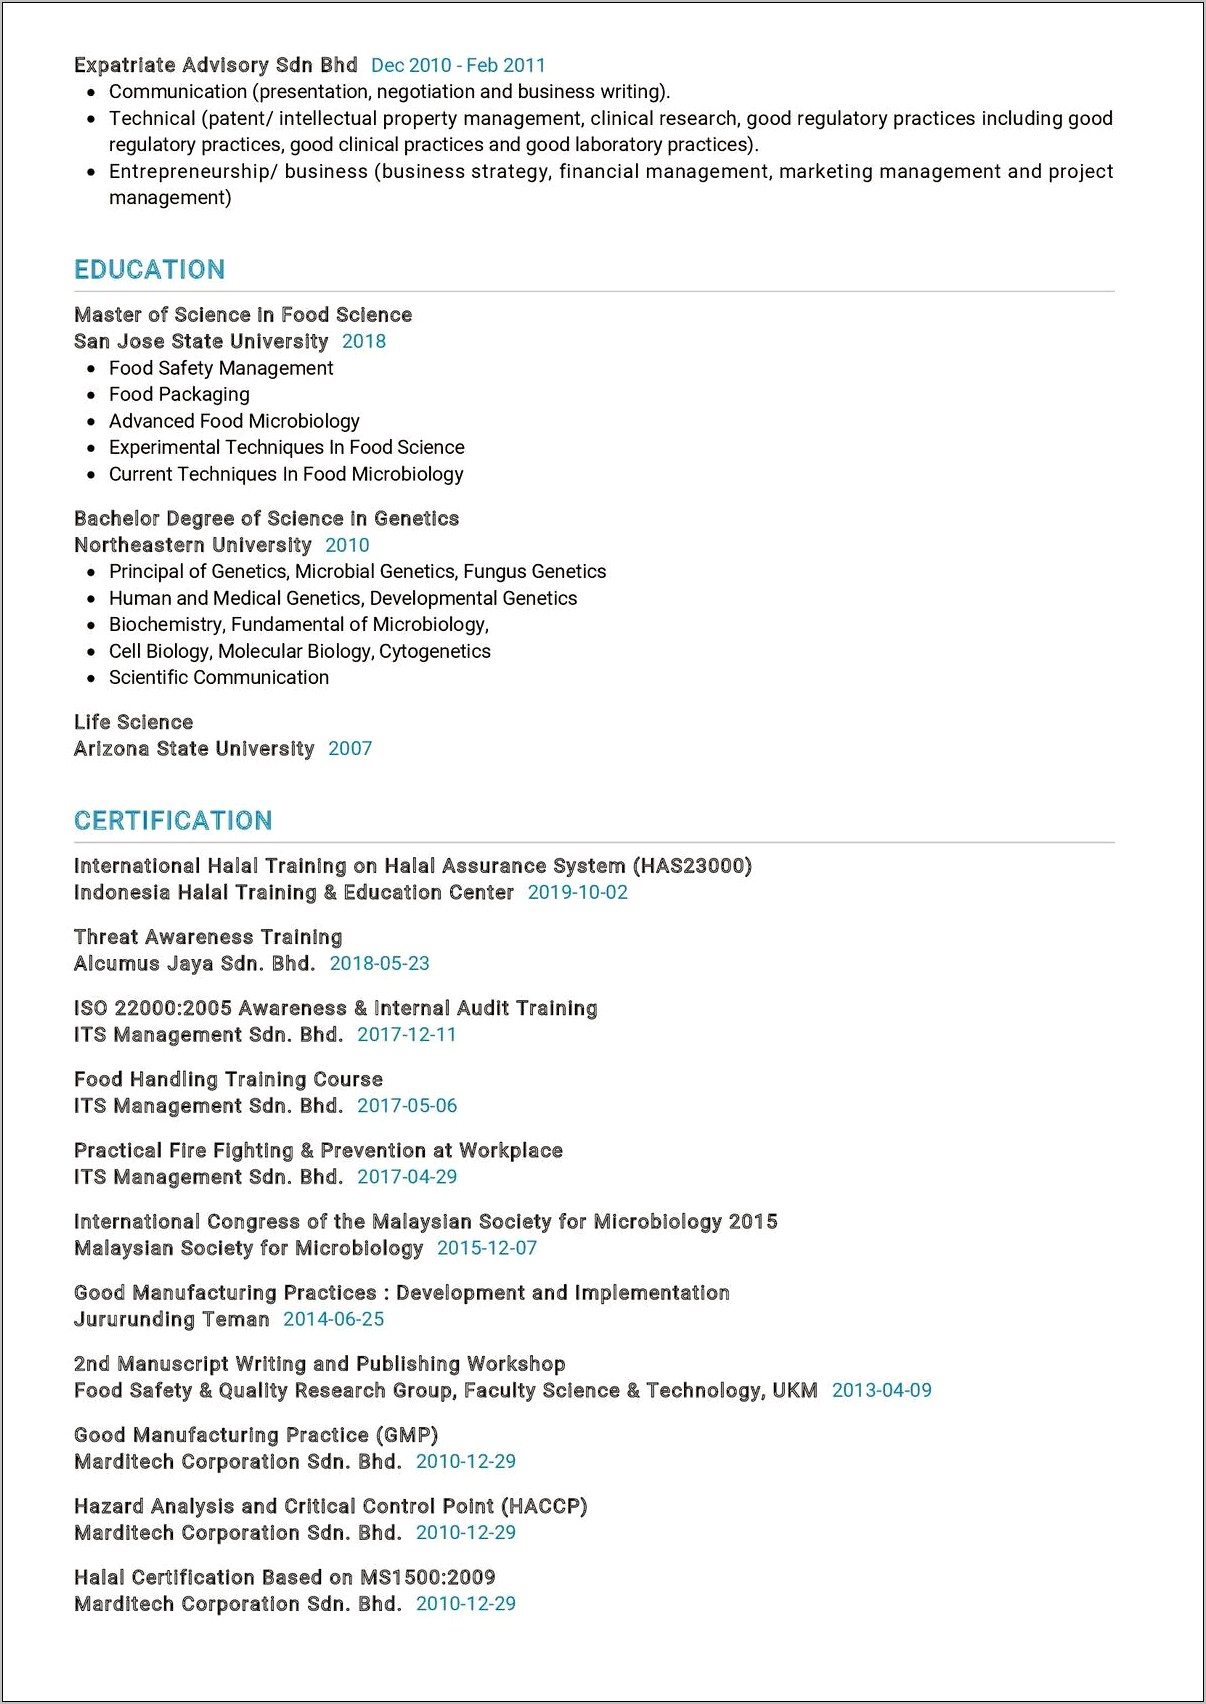 Entry Level Microbiology Resume Template Free